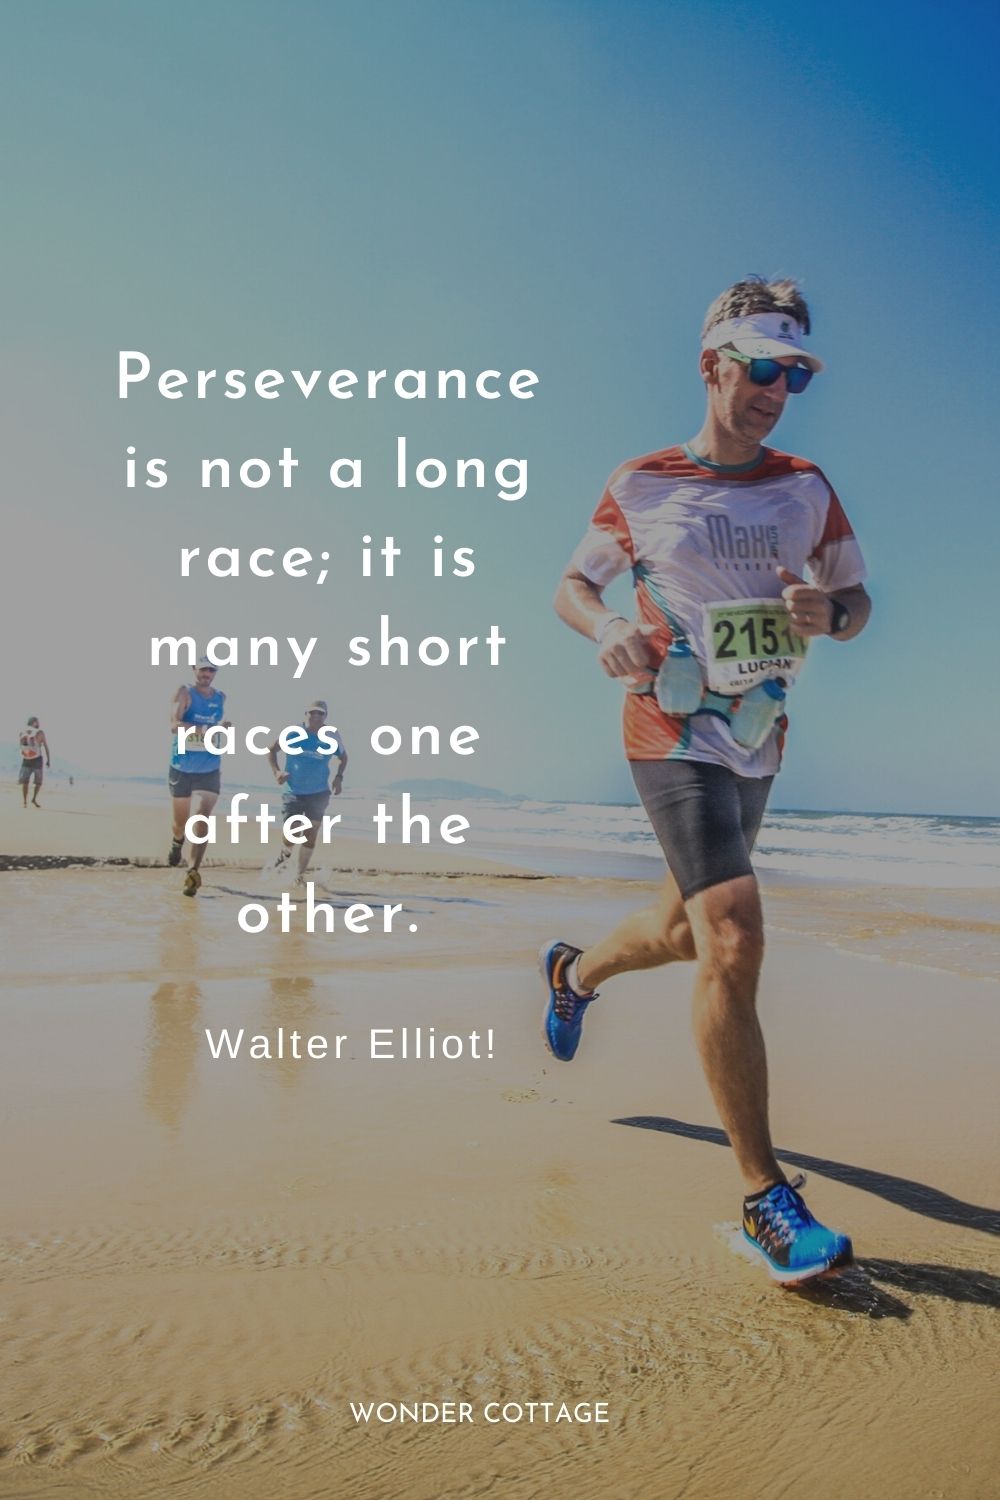 Perseverance is not a long race; it is many short races one after the other. Walter Elliot
perseverance quotes